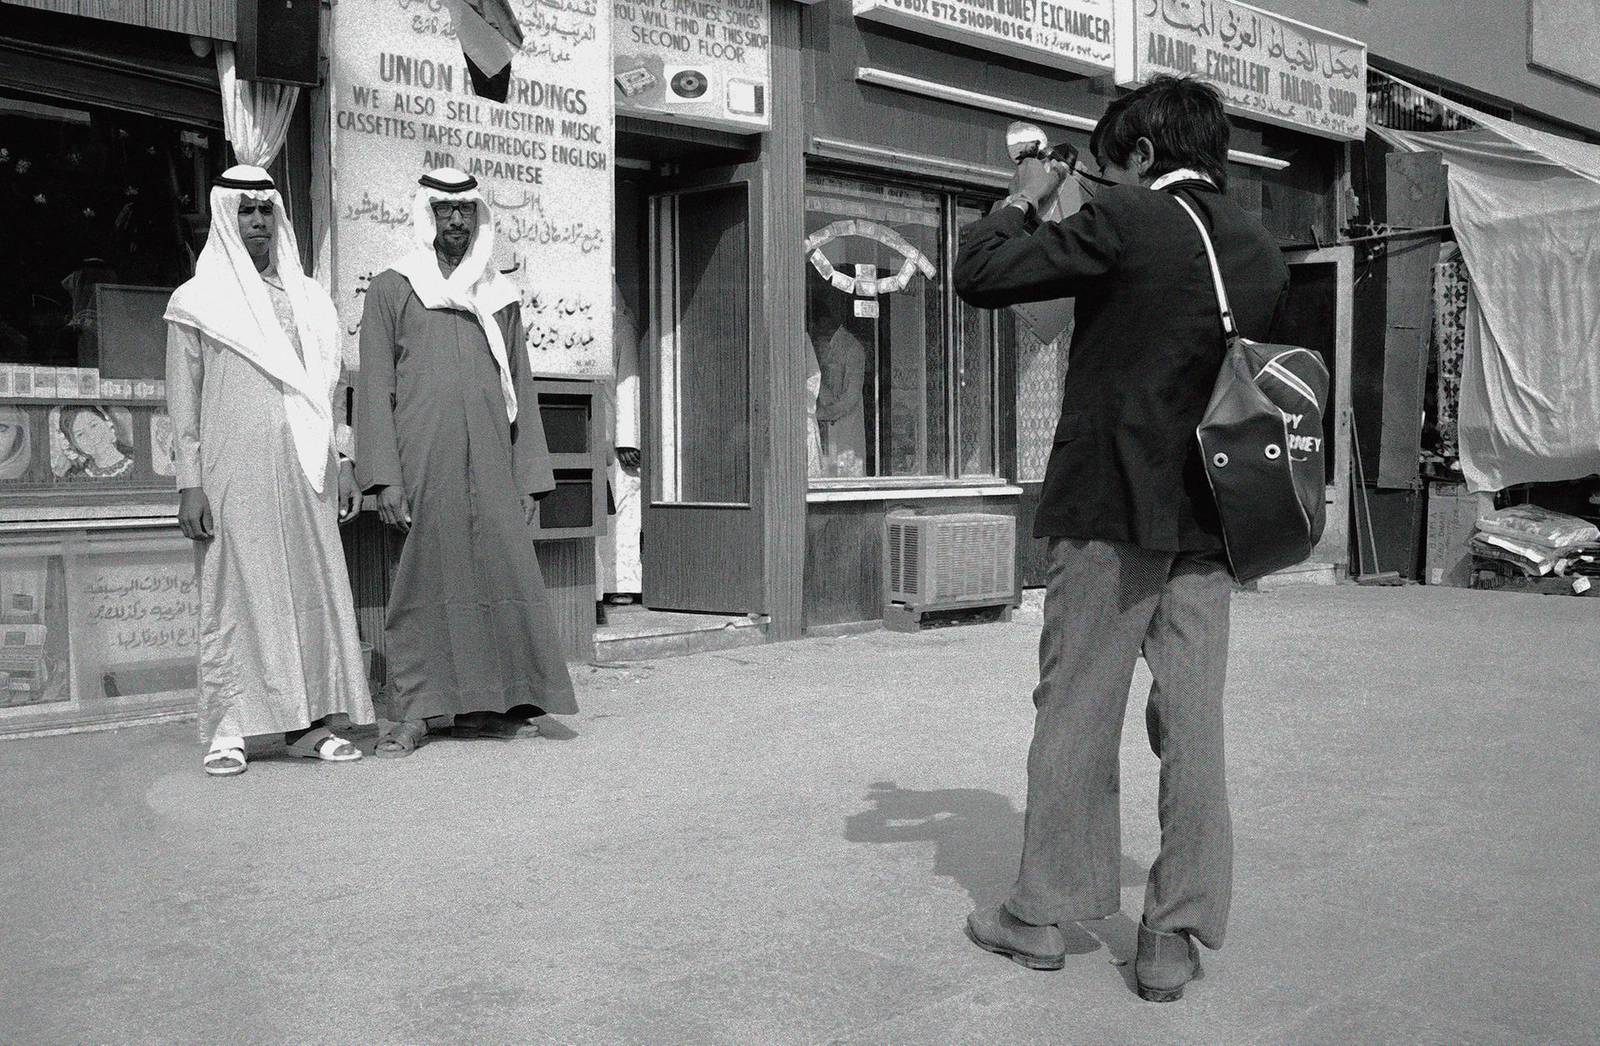 UAE then and now: the Abu Dhabi souq where dreams came true